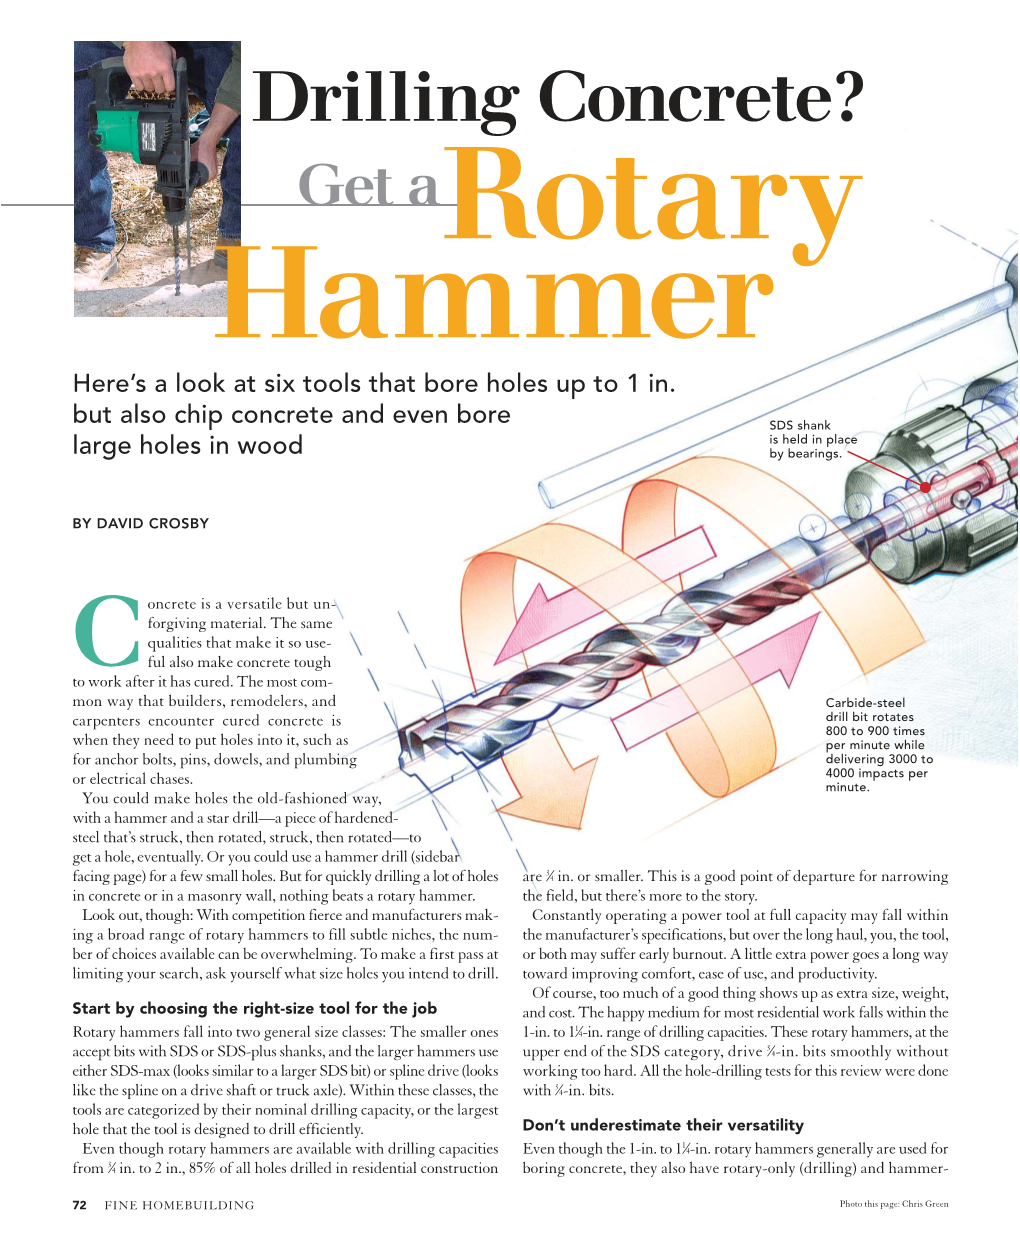 Drilling Concrete? Get a Rotary Hammer